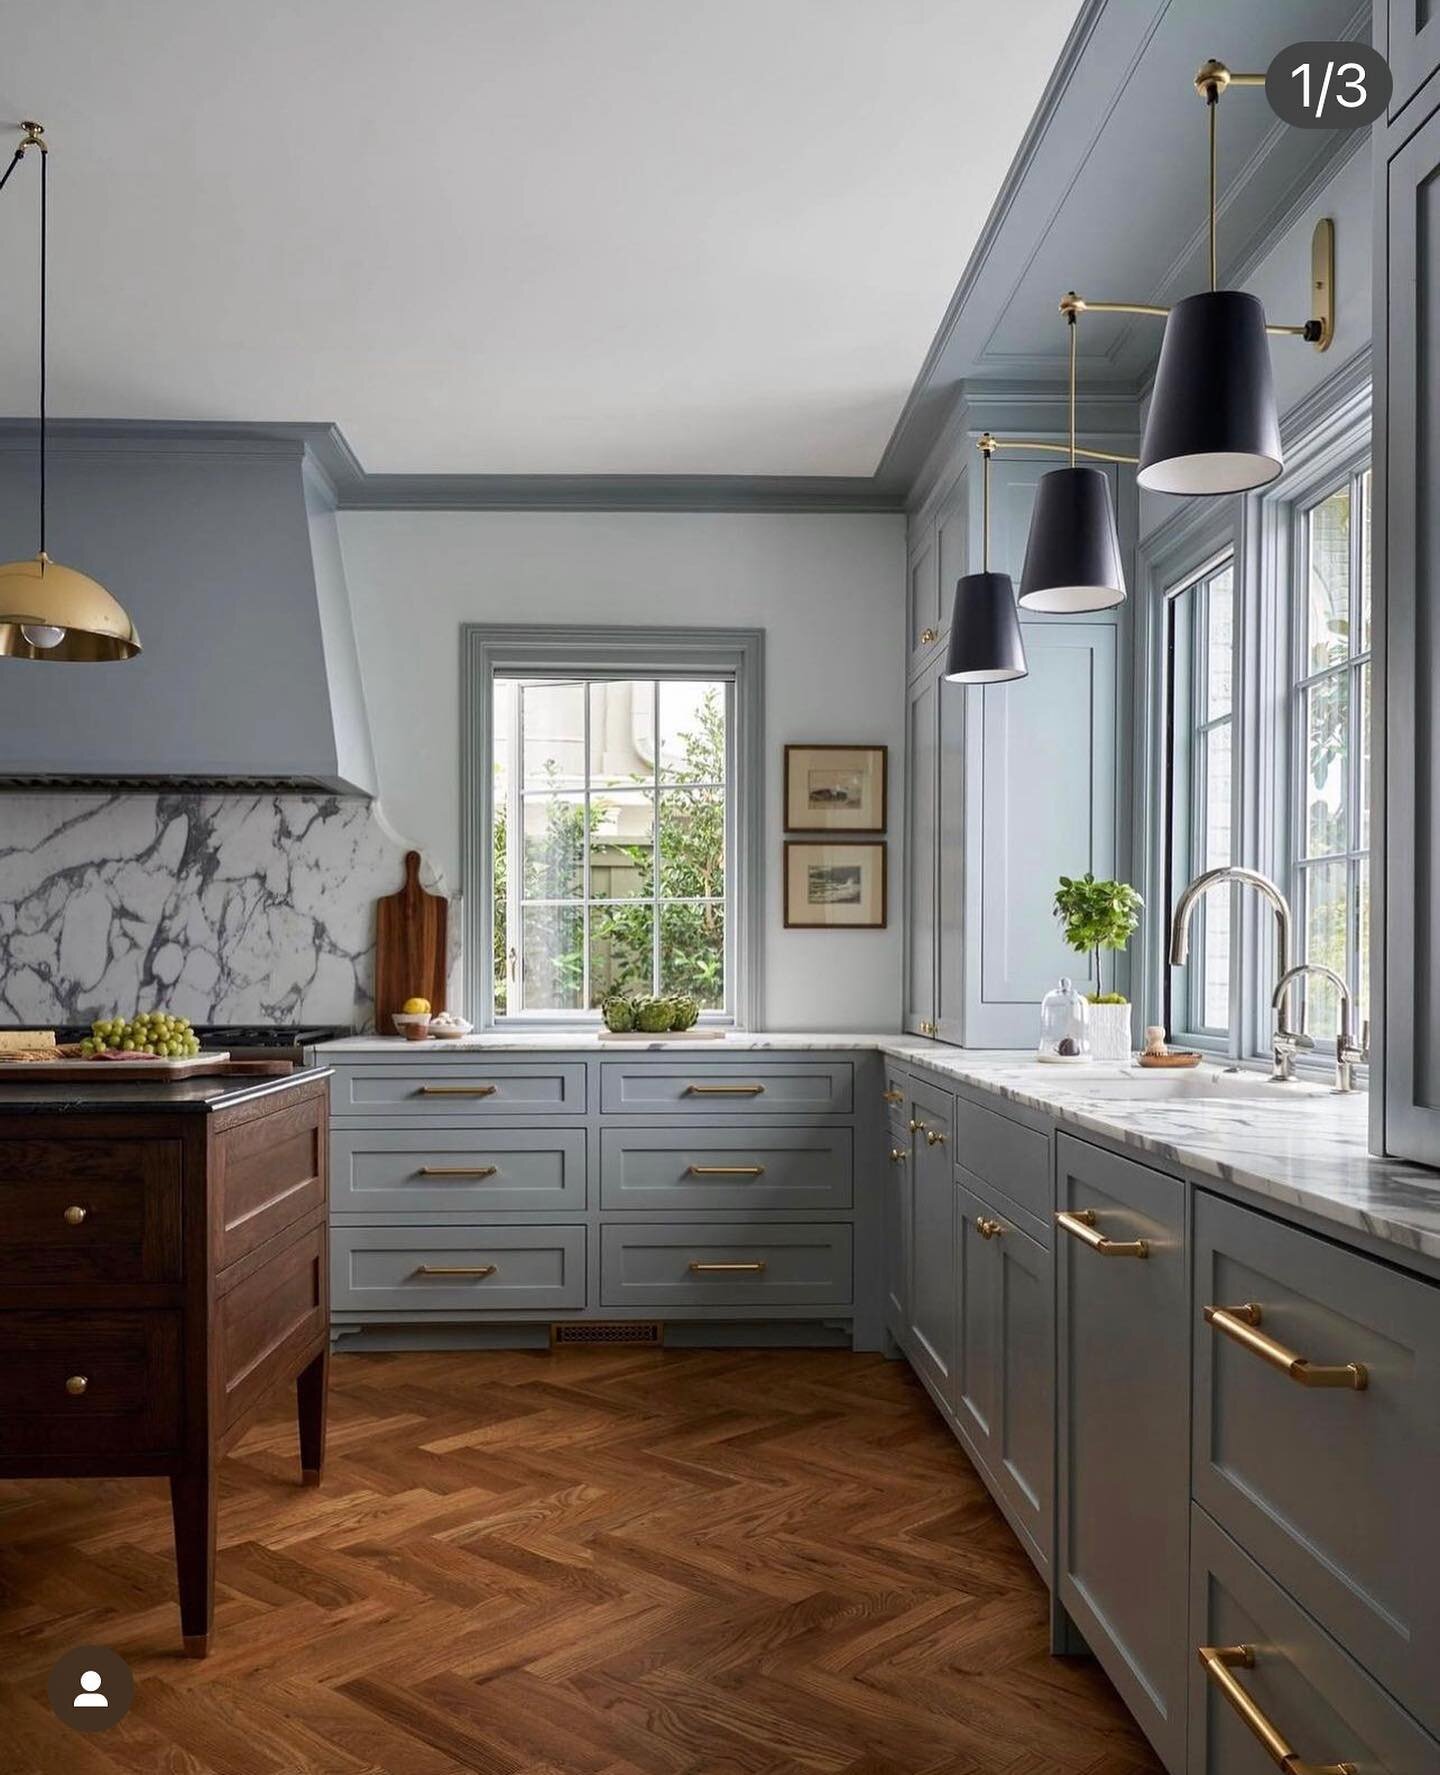 I have been watching &ldquo;For The Live If Kitchens&rdquo; and this beautiful kitchen by @dunbarroad reminds me of their work. If this were my kitchen I would of even been bolder by not having any upper cabinets along the sink wall and put additiona